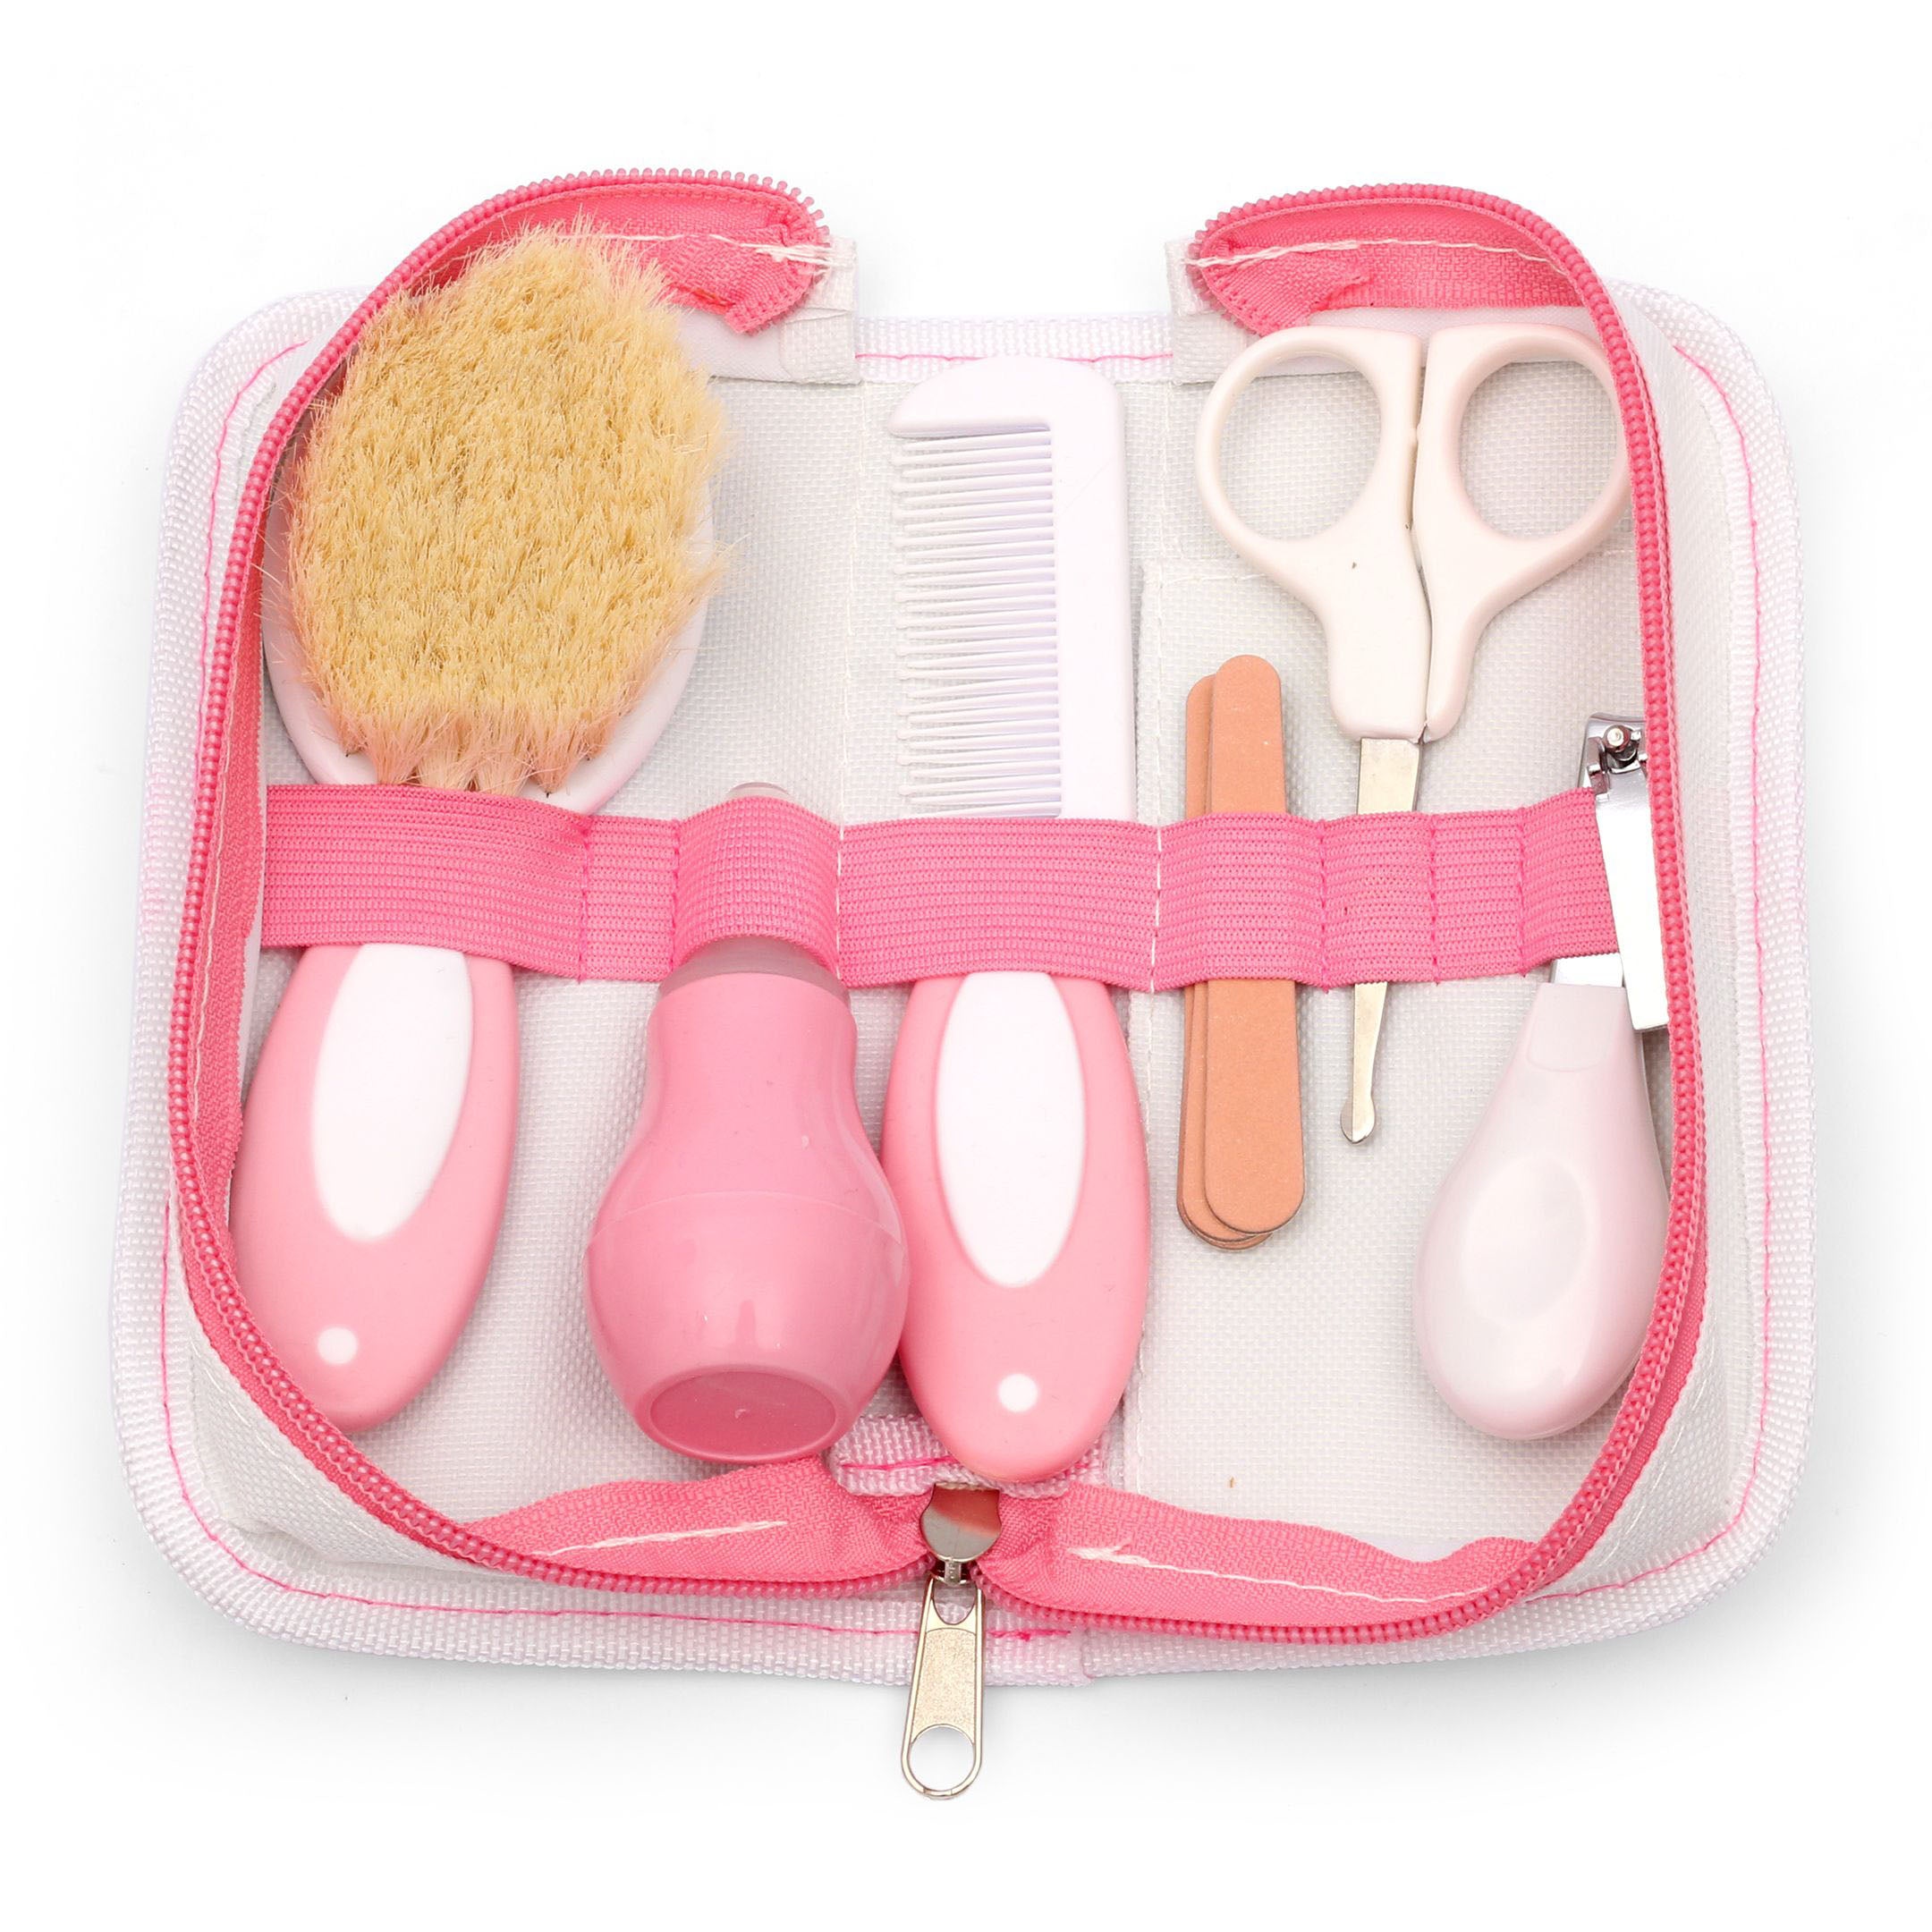 Imported 6 Pcs Babies Nail Hair Care Grooming Manicure Kit Zipper Pouch For Easy Travelling